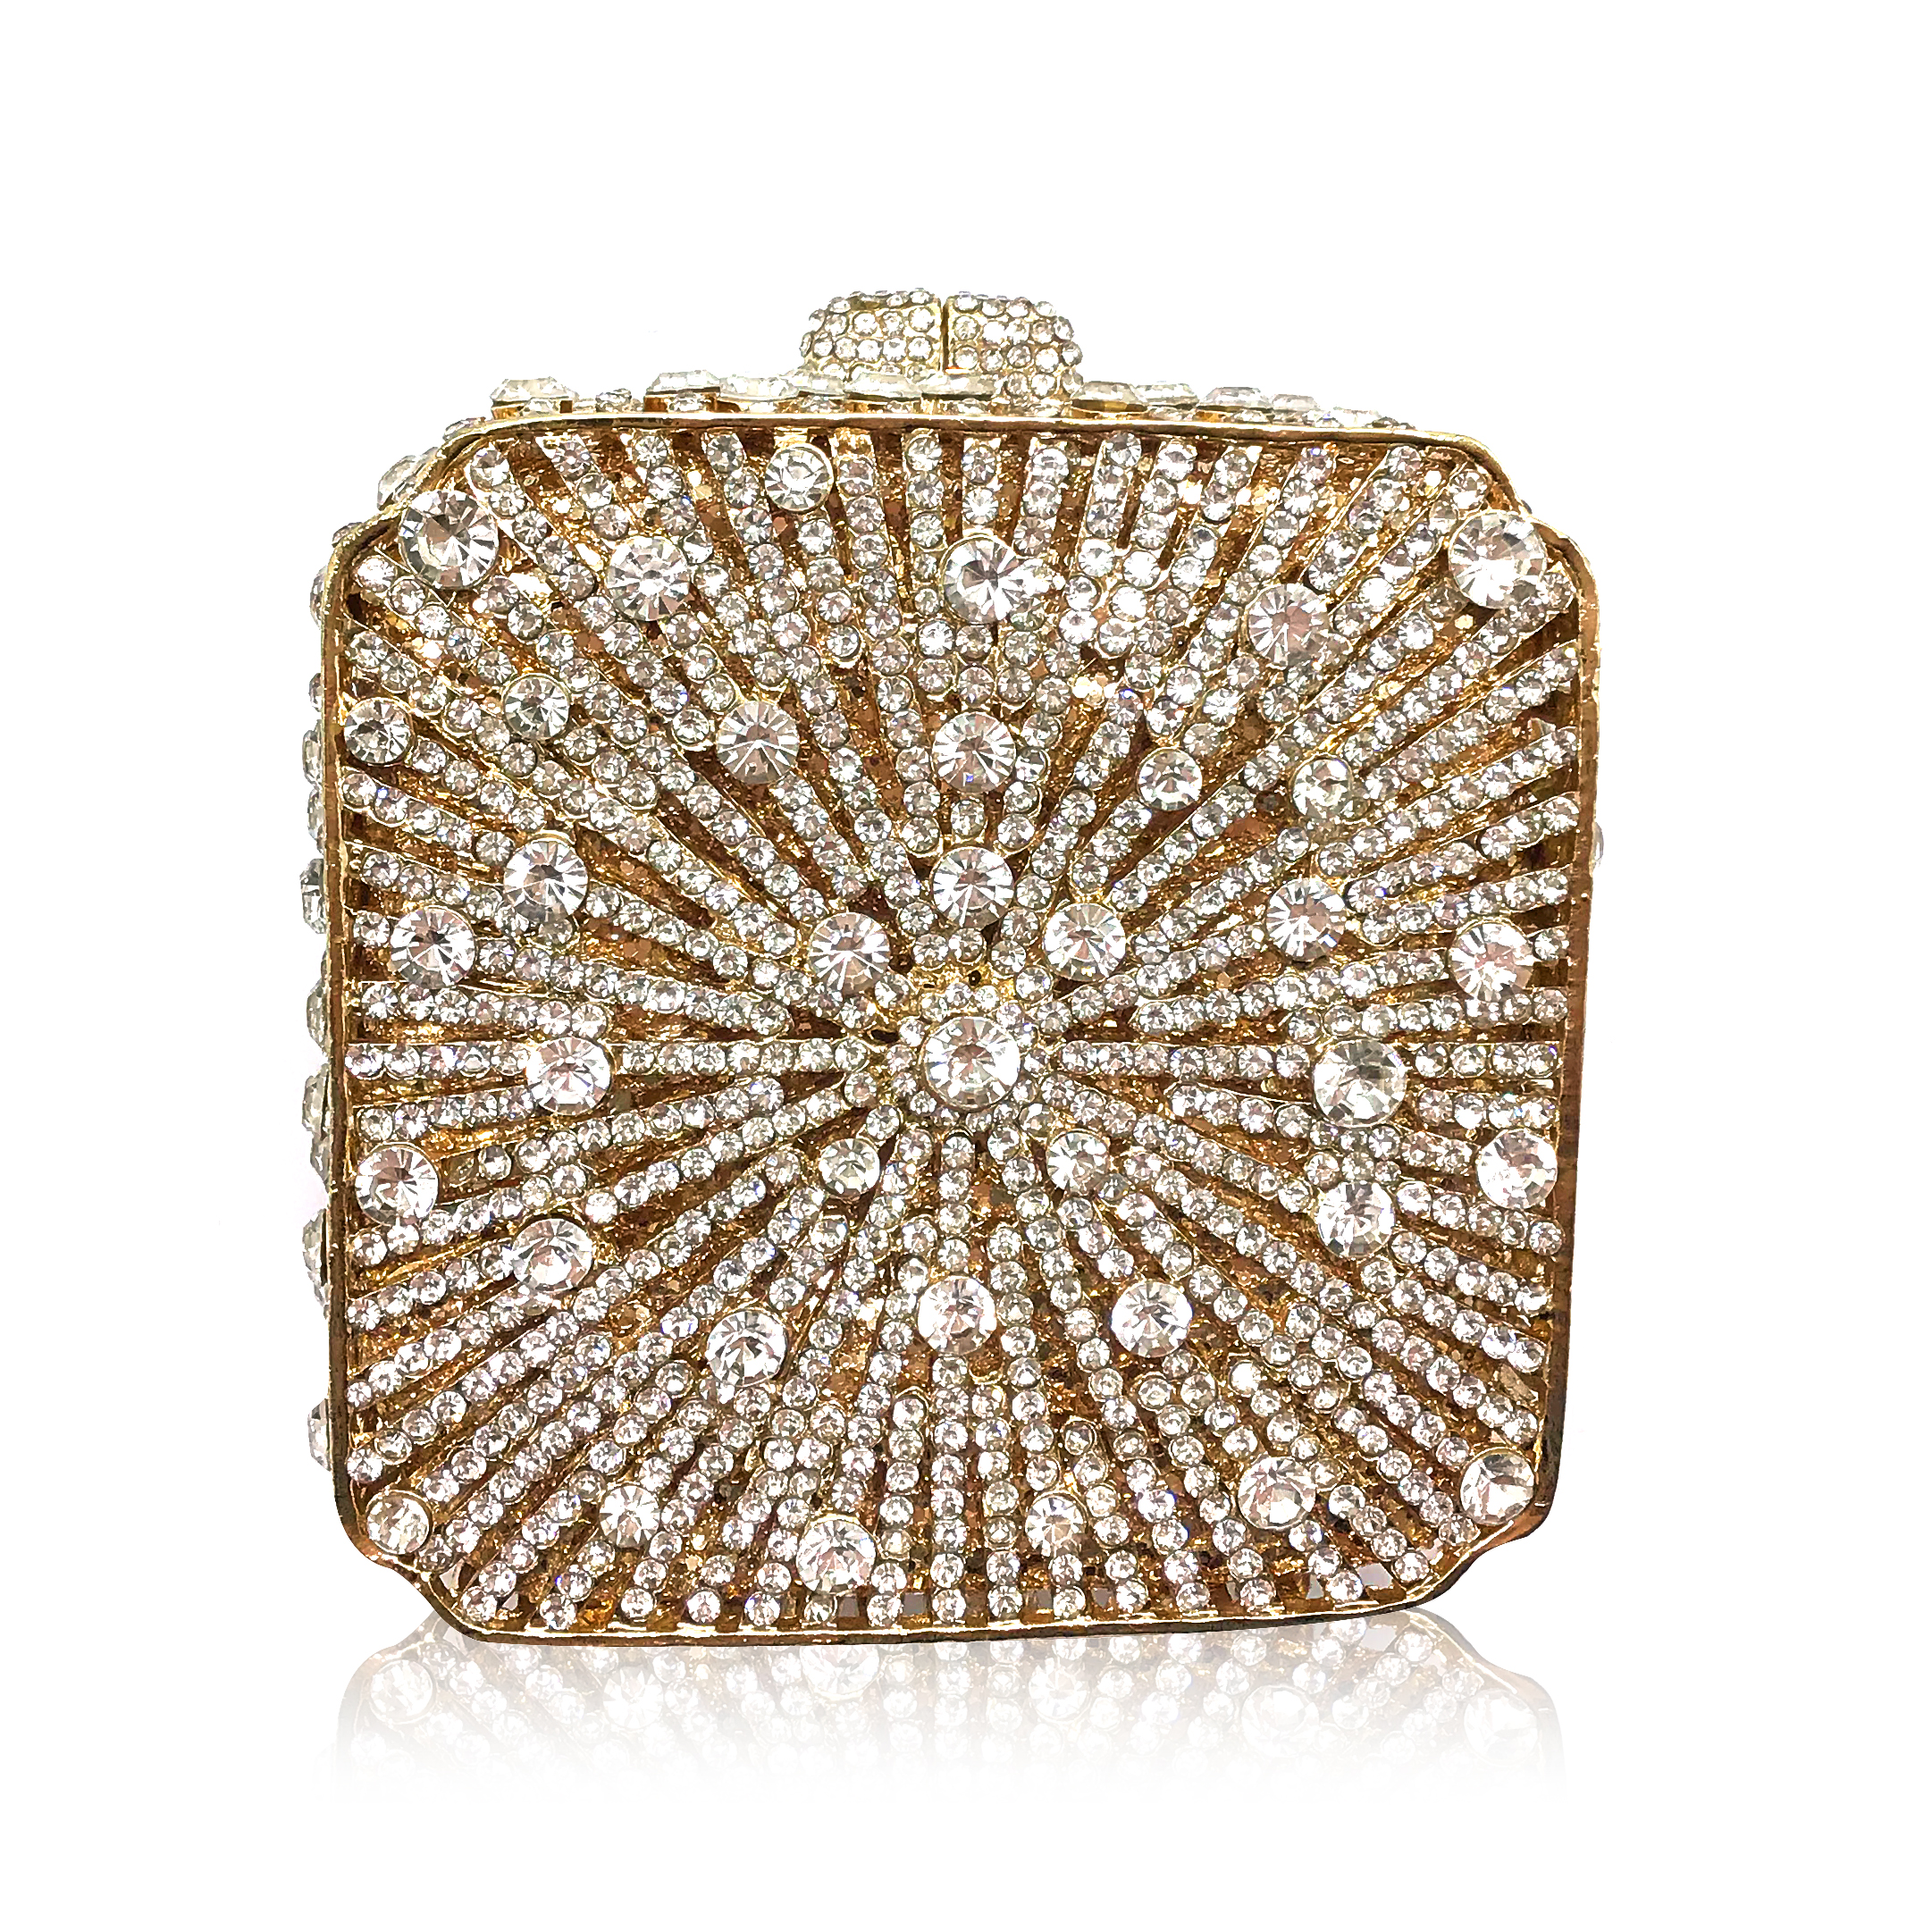 Gold Crystal Clutch Bag|Holly|Jeanette Maree|Shop Online Now